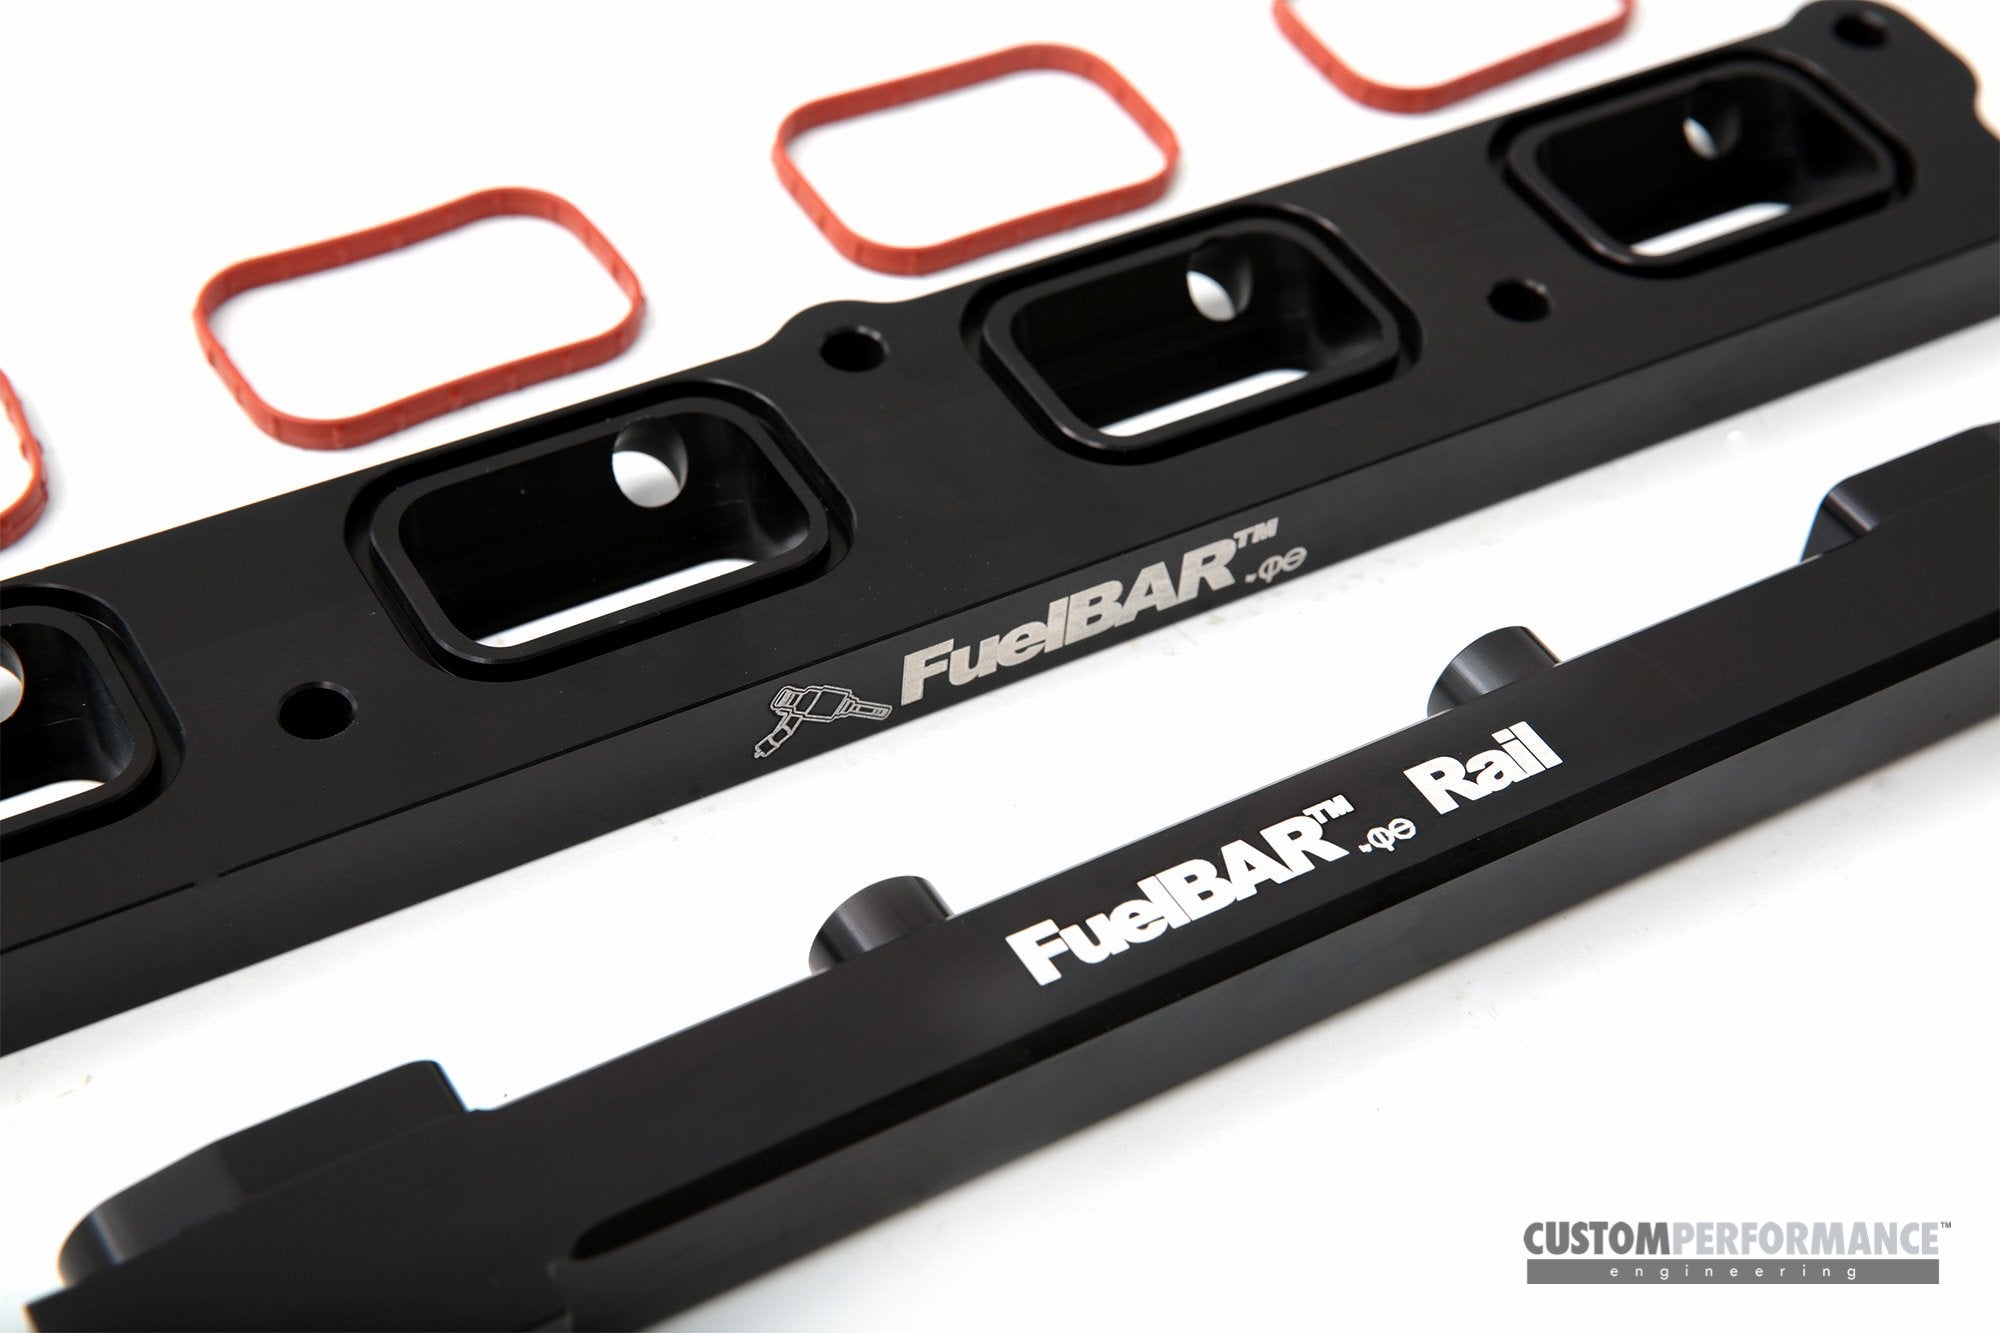 cp-E FuelBAR EcoBoost Aux Fuel Rail - Porta carburante Focus ST, Focus RS, Mustang EcoBoost, Ford Mondeo